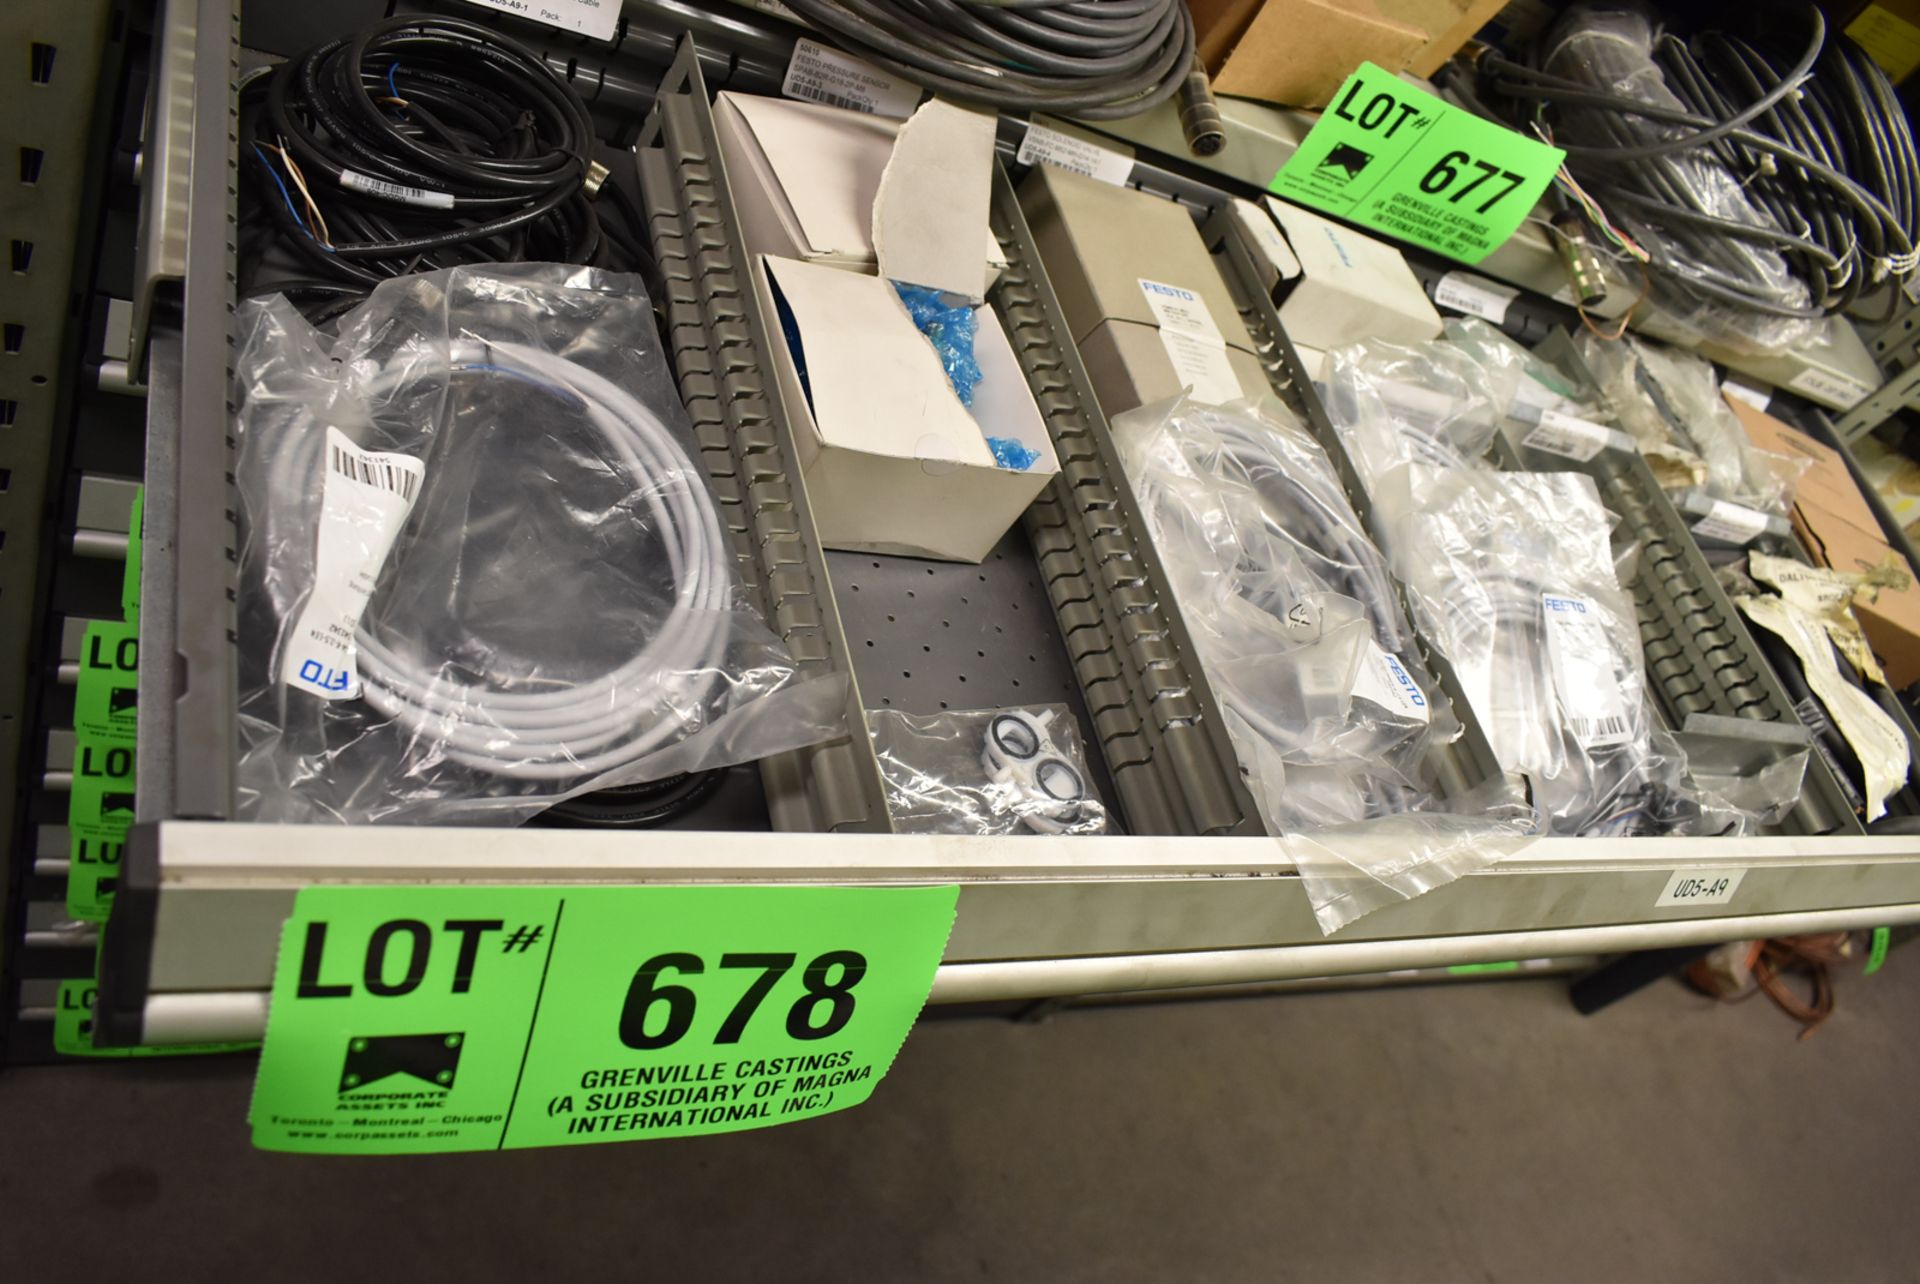 LOT/ CONTENTS OF DRAWER INCLUDING FESTO COMPONENTS - CONNECTOR CABLES, SOLENOID VALVES, BREAKERS,